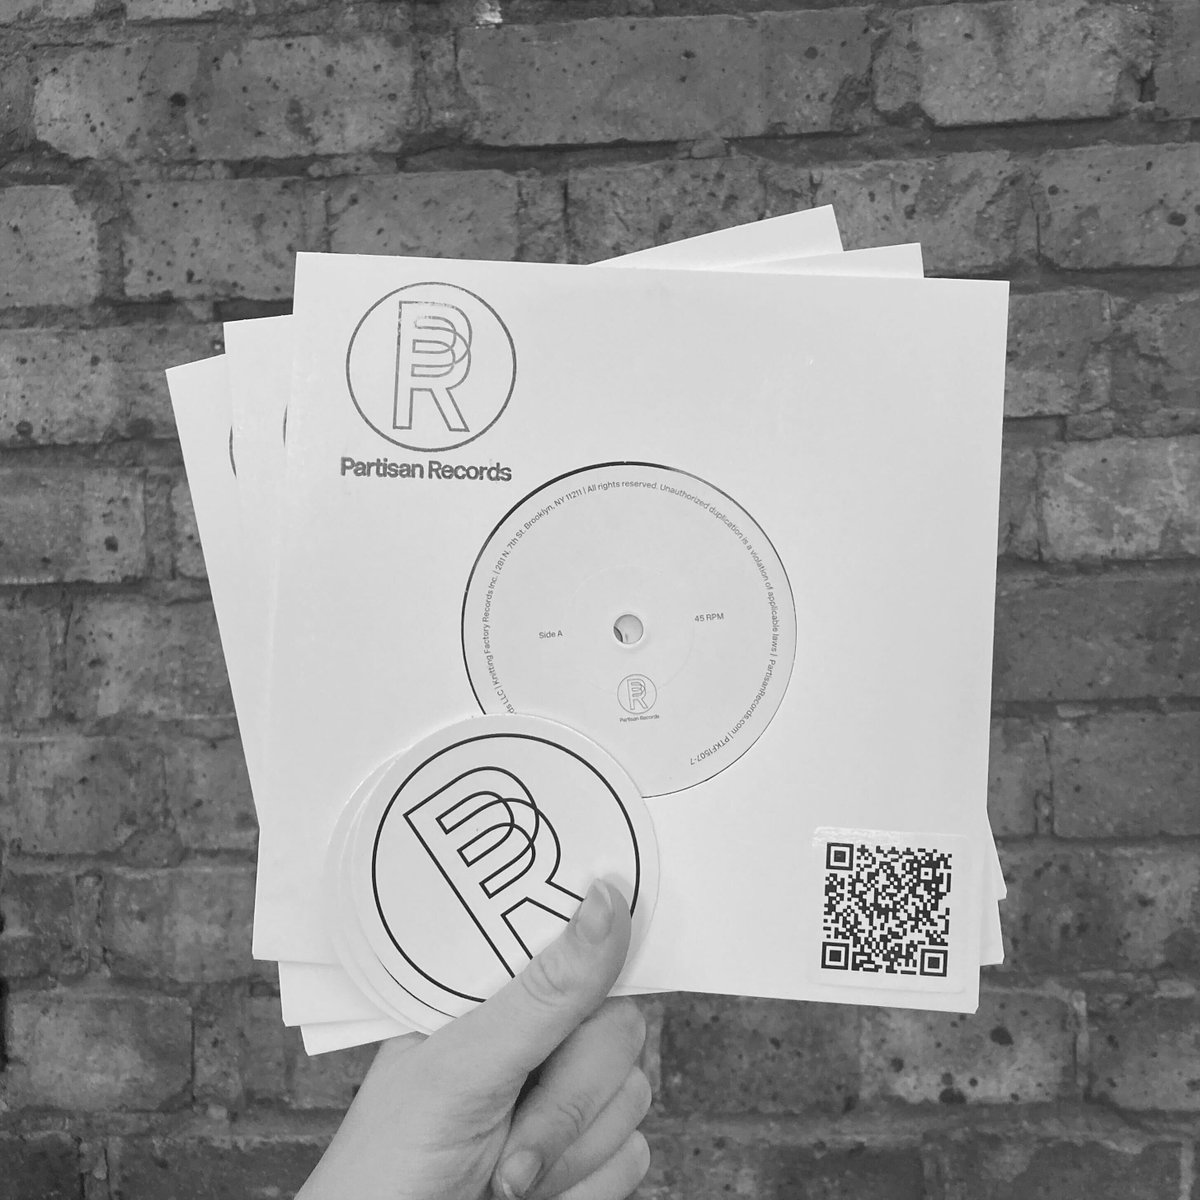 WHITE LABEL GIVEAWAY @partisanrecords will be handing out white label 7's to the first 200 people attending the Partisan showcase at Rough Trade East next Tuesday. Featuring singles from the showcase's artists: @lipcritic, @AngelicaGarcia and @honestyrhere. Secure your ticket